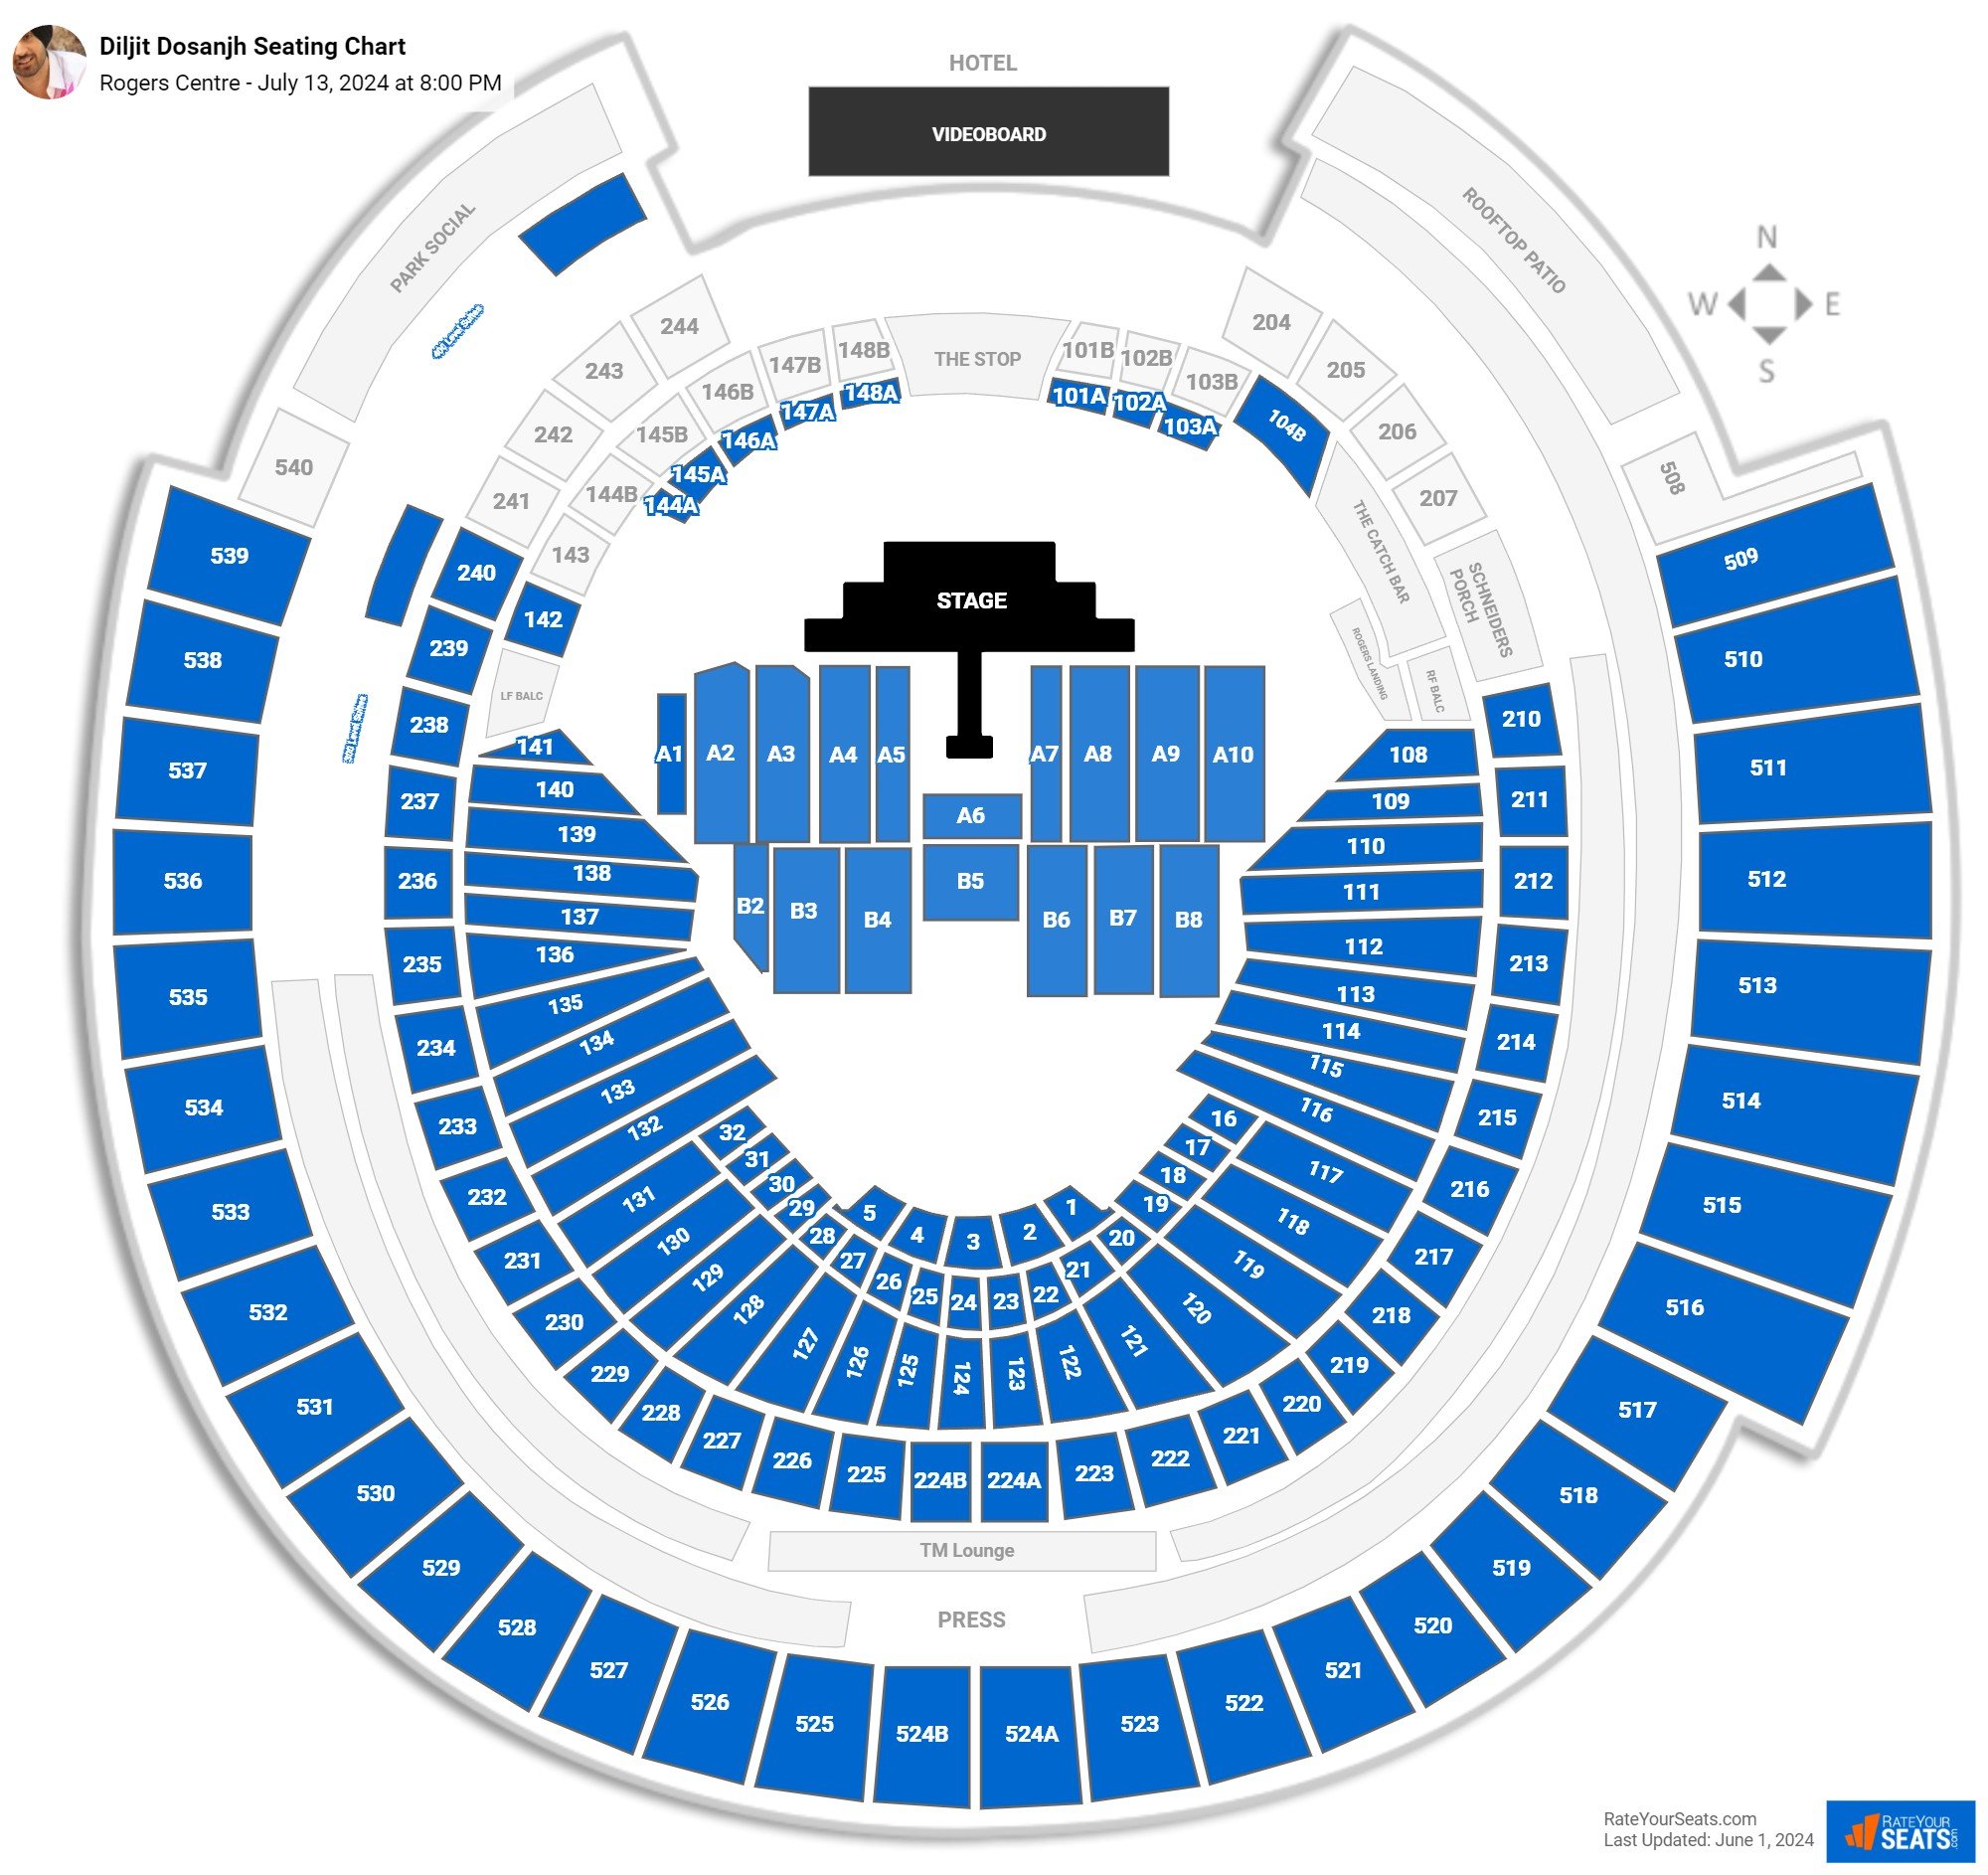 Diljit Dosanjh seating chart Rogers Centre